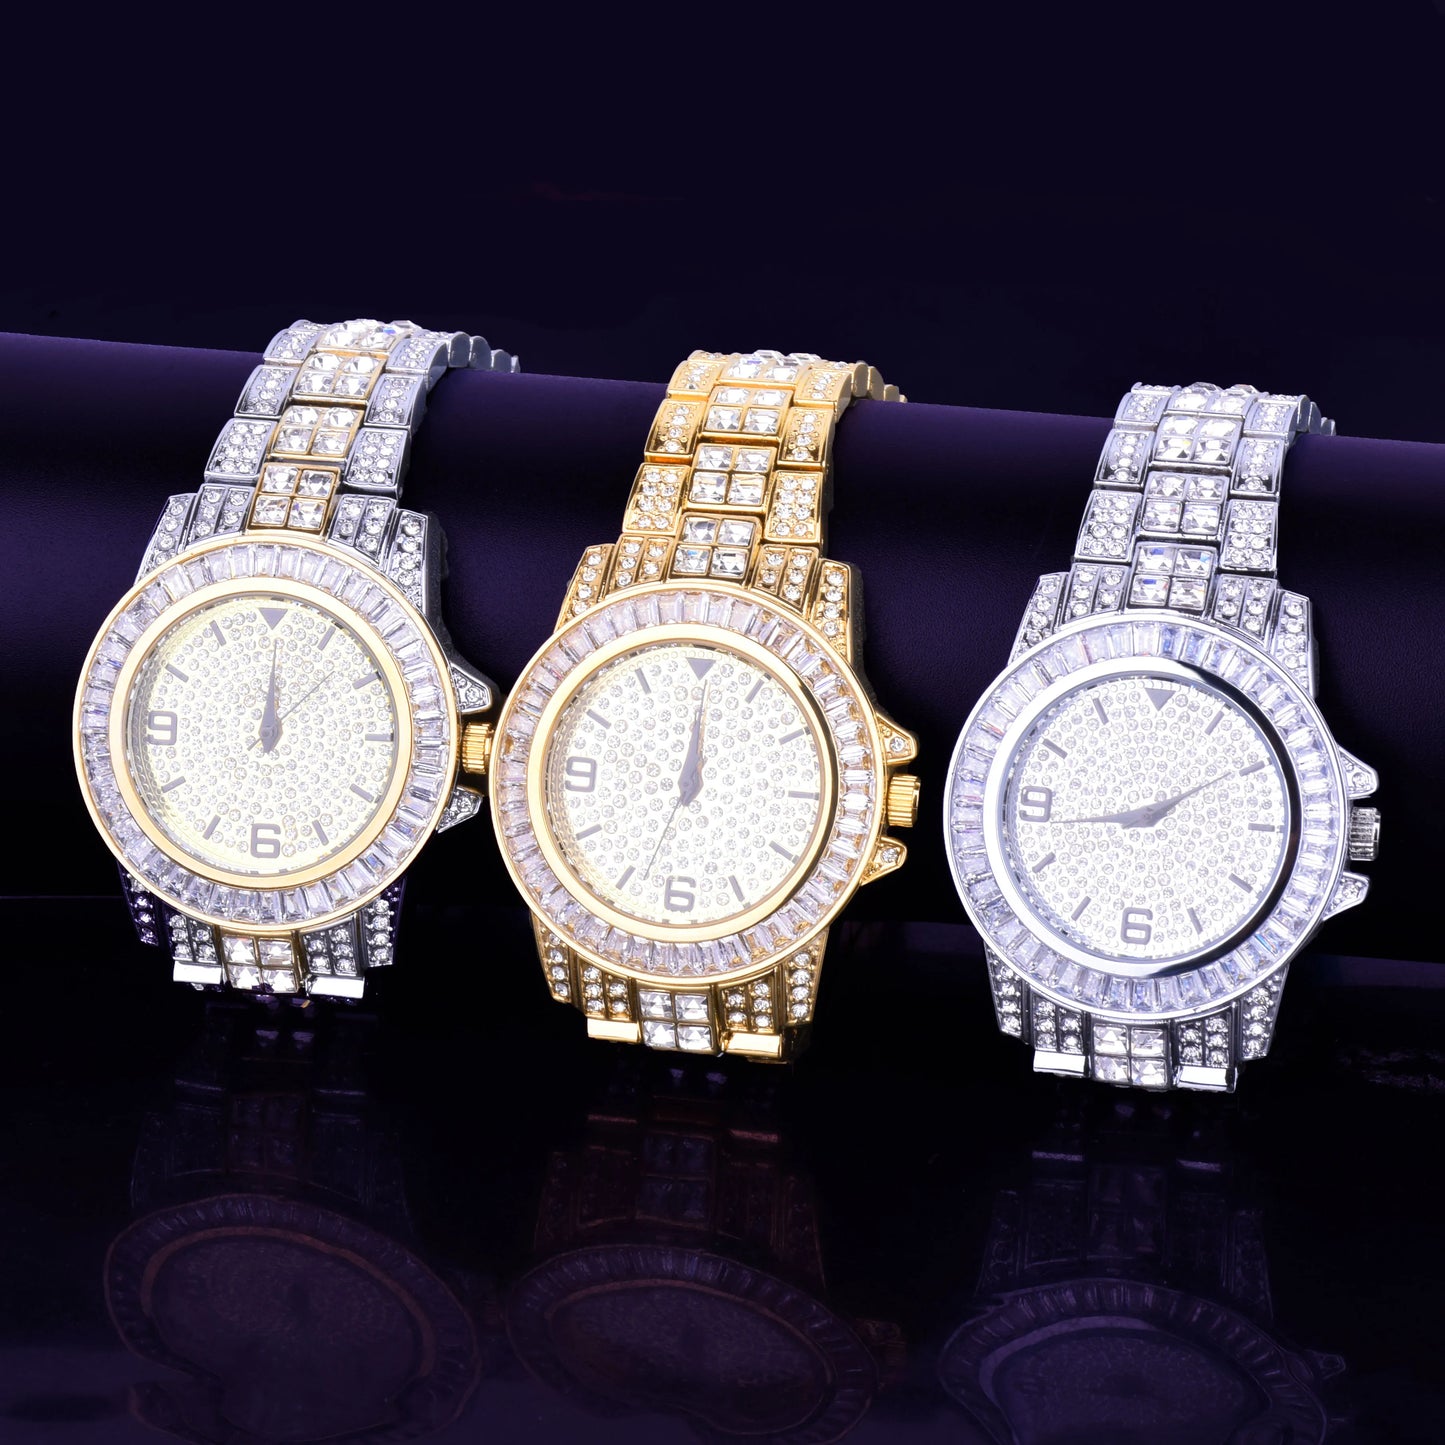 IceBox DC's Gold-Plated Military Quartz Watch with Baguette stones